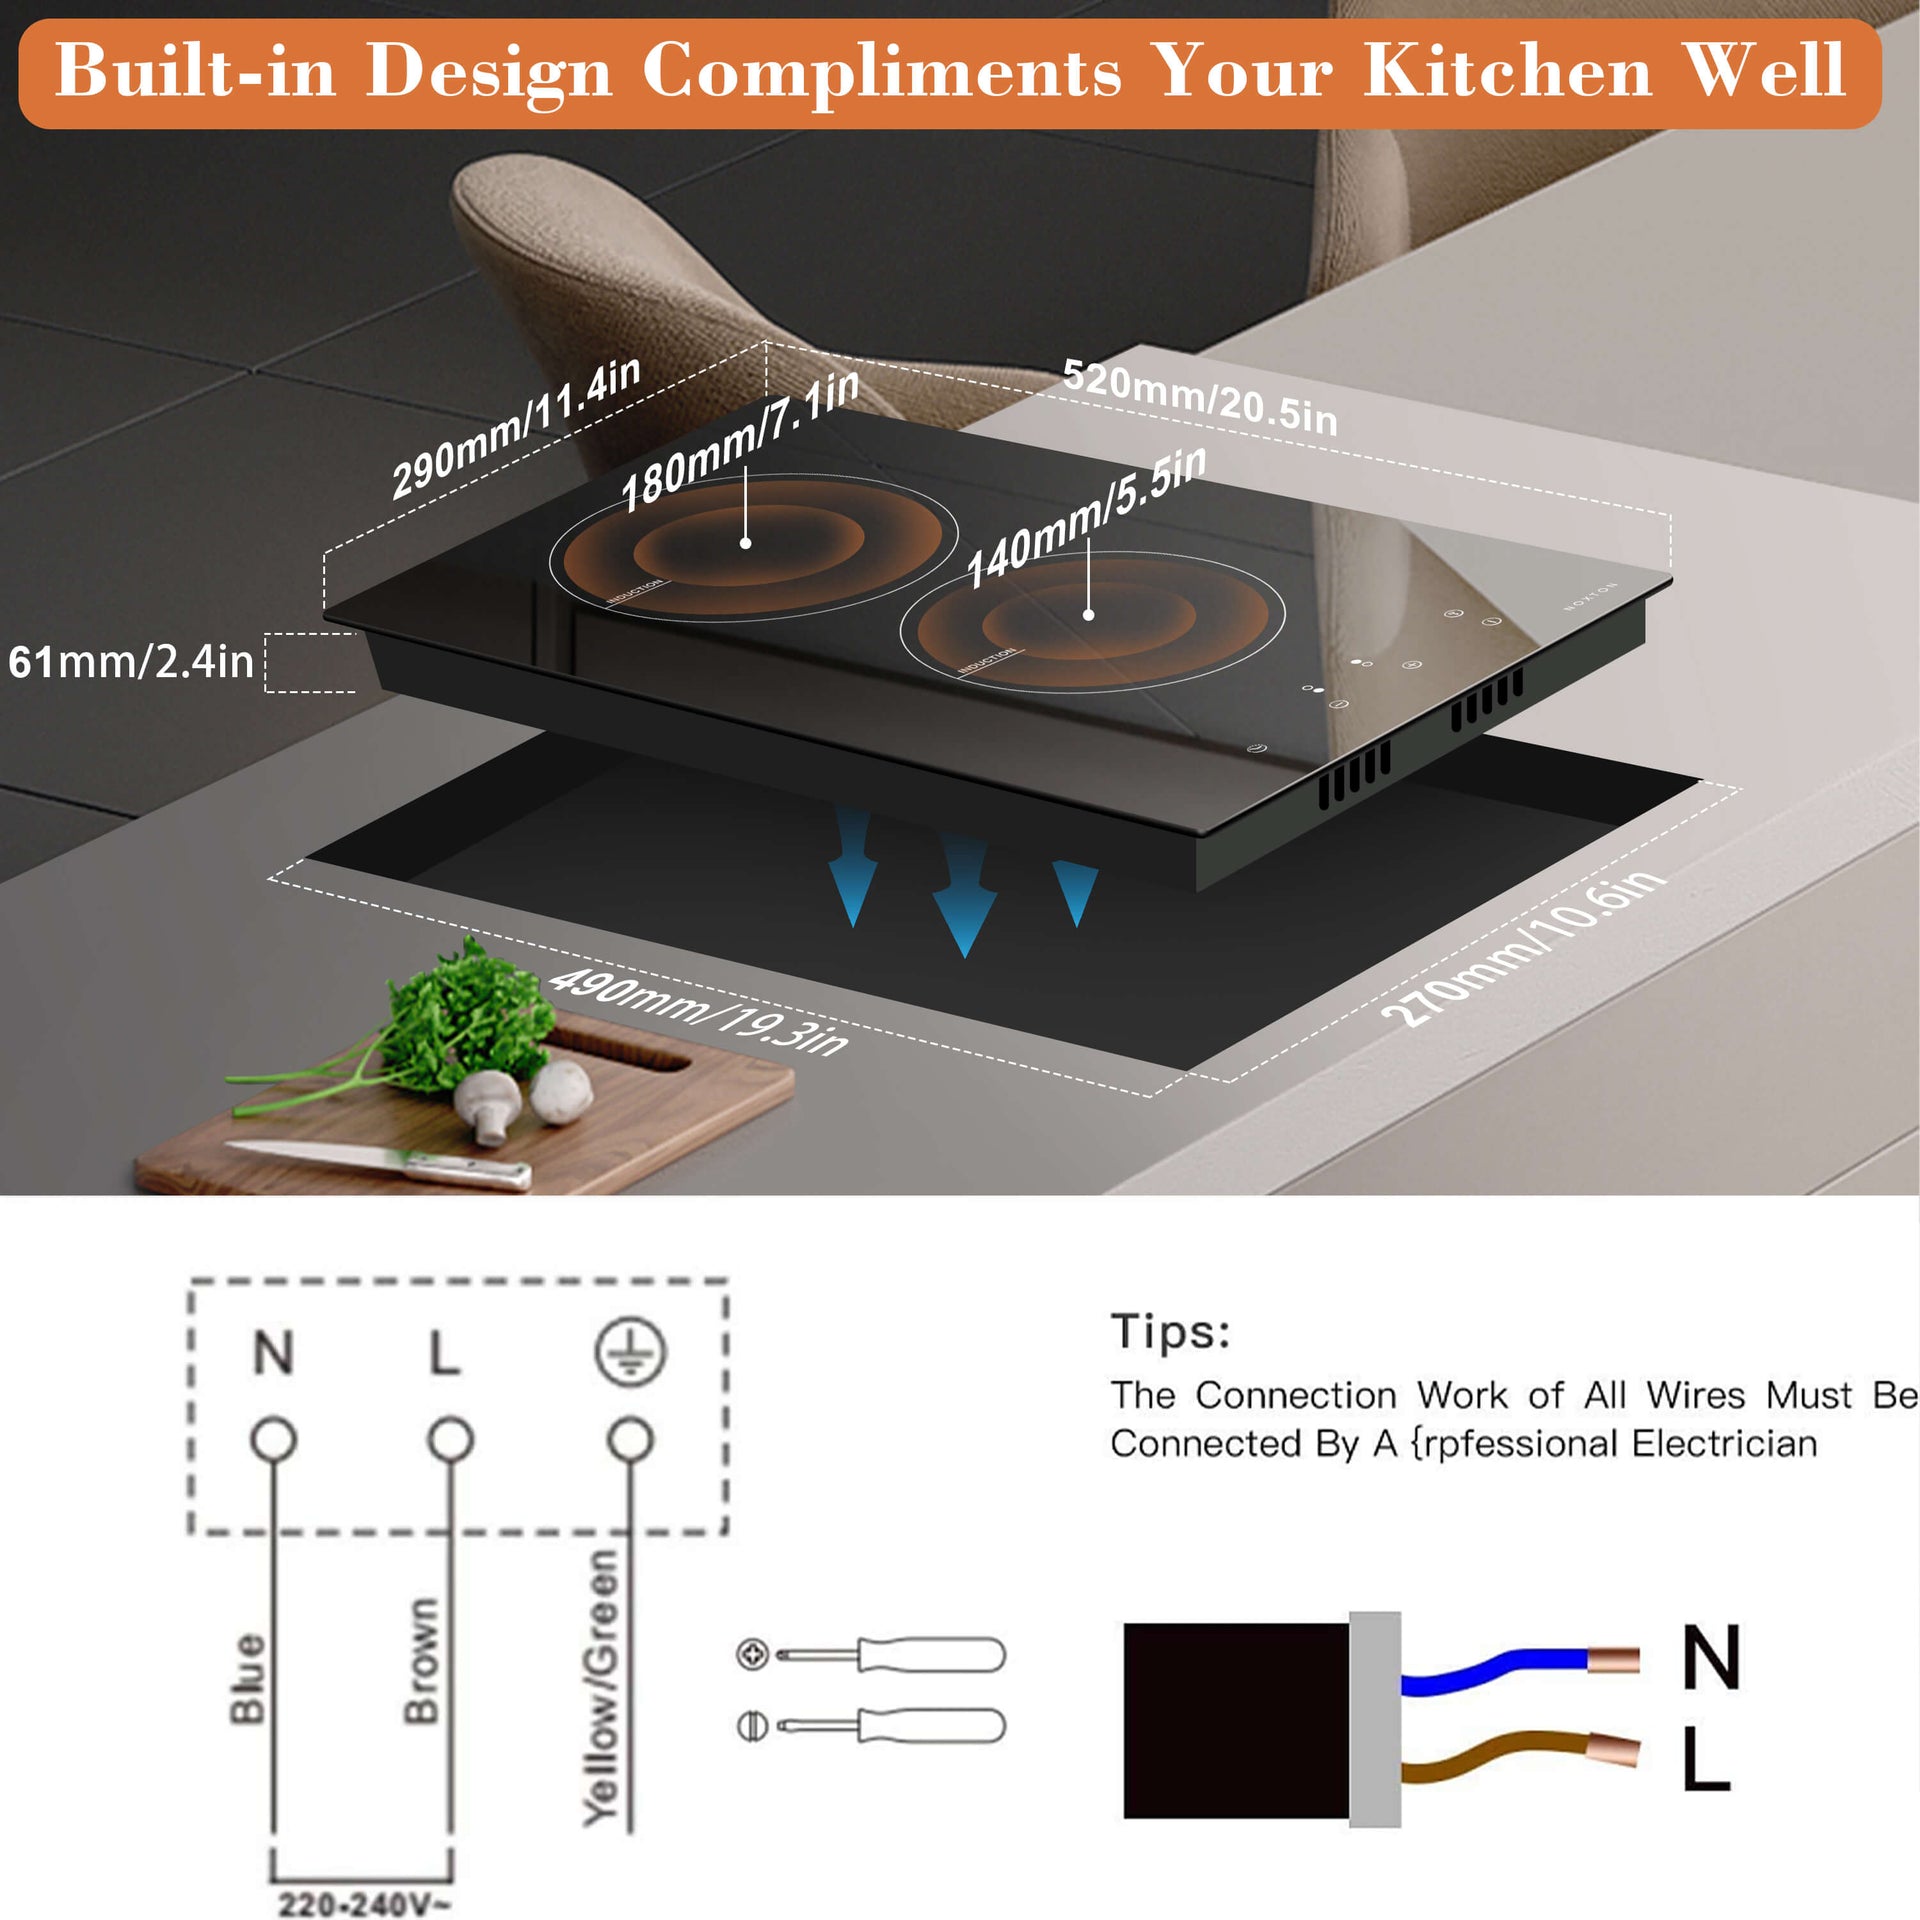  induction hob built-in